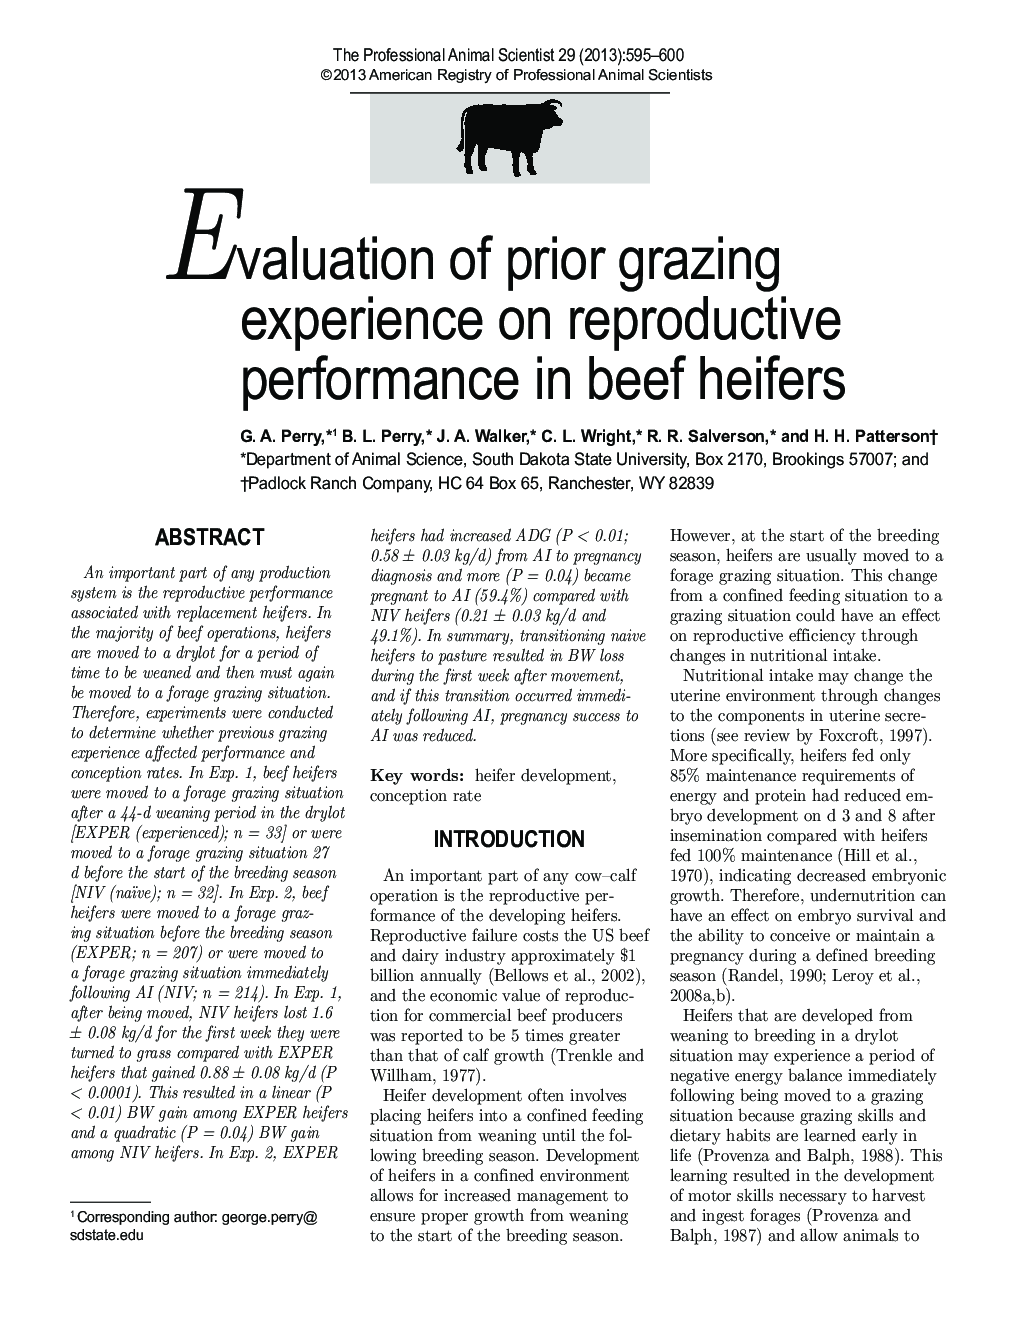 Evaluation of prior grazing experience on reproductive performance in beef heifers